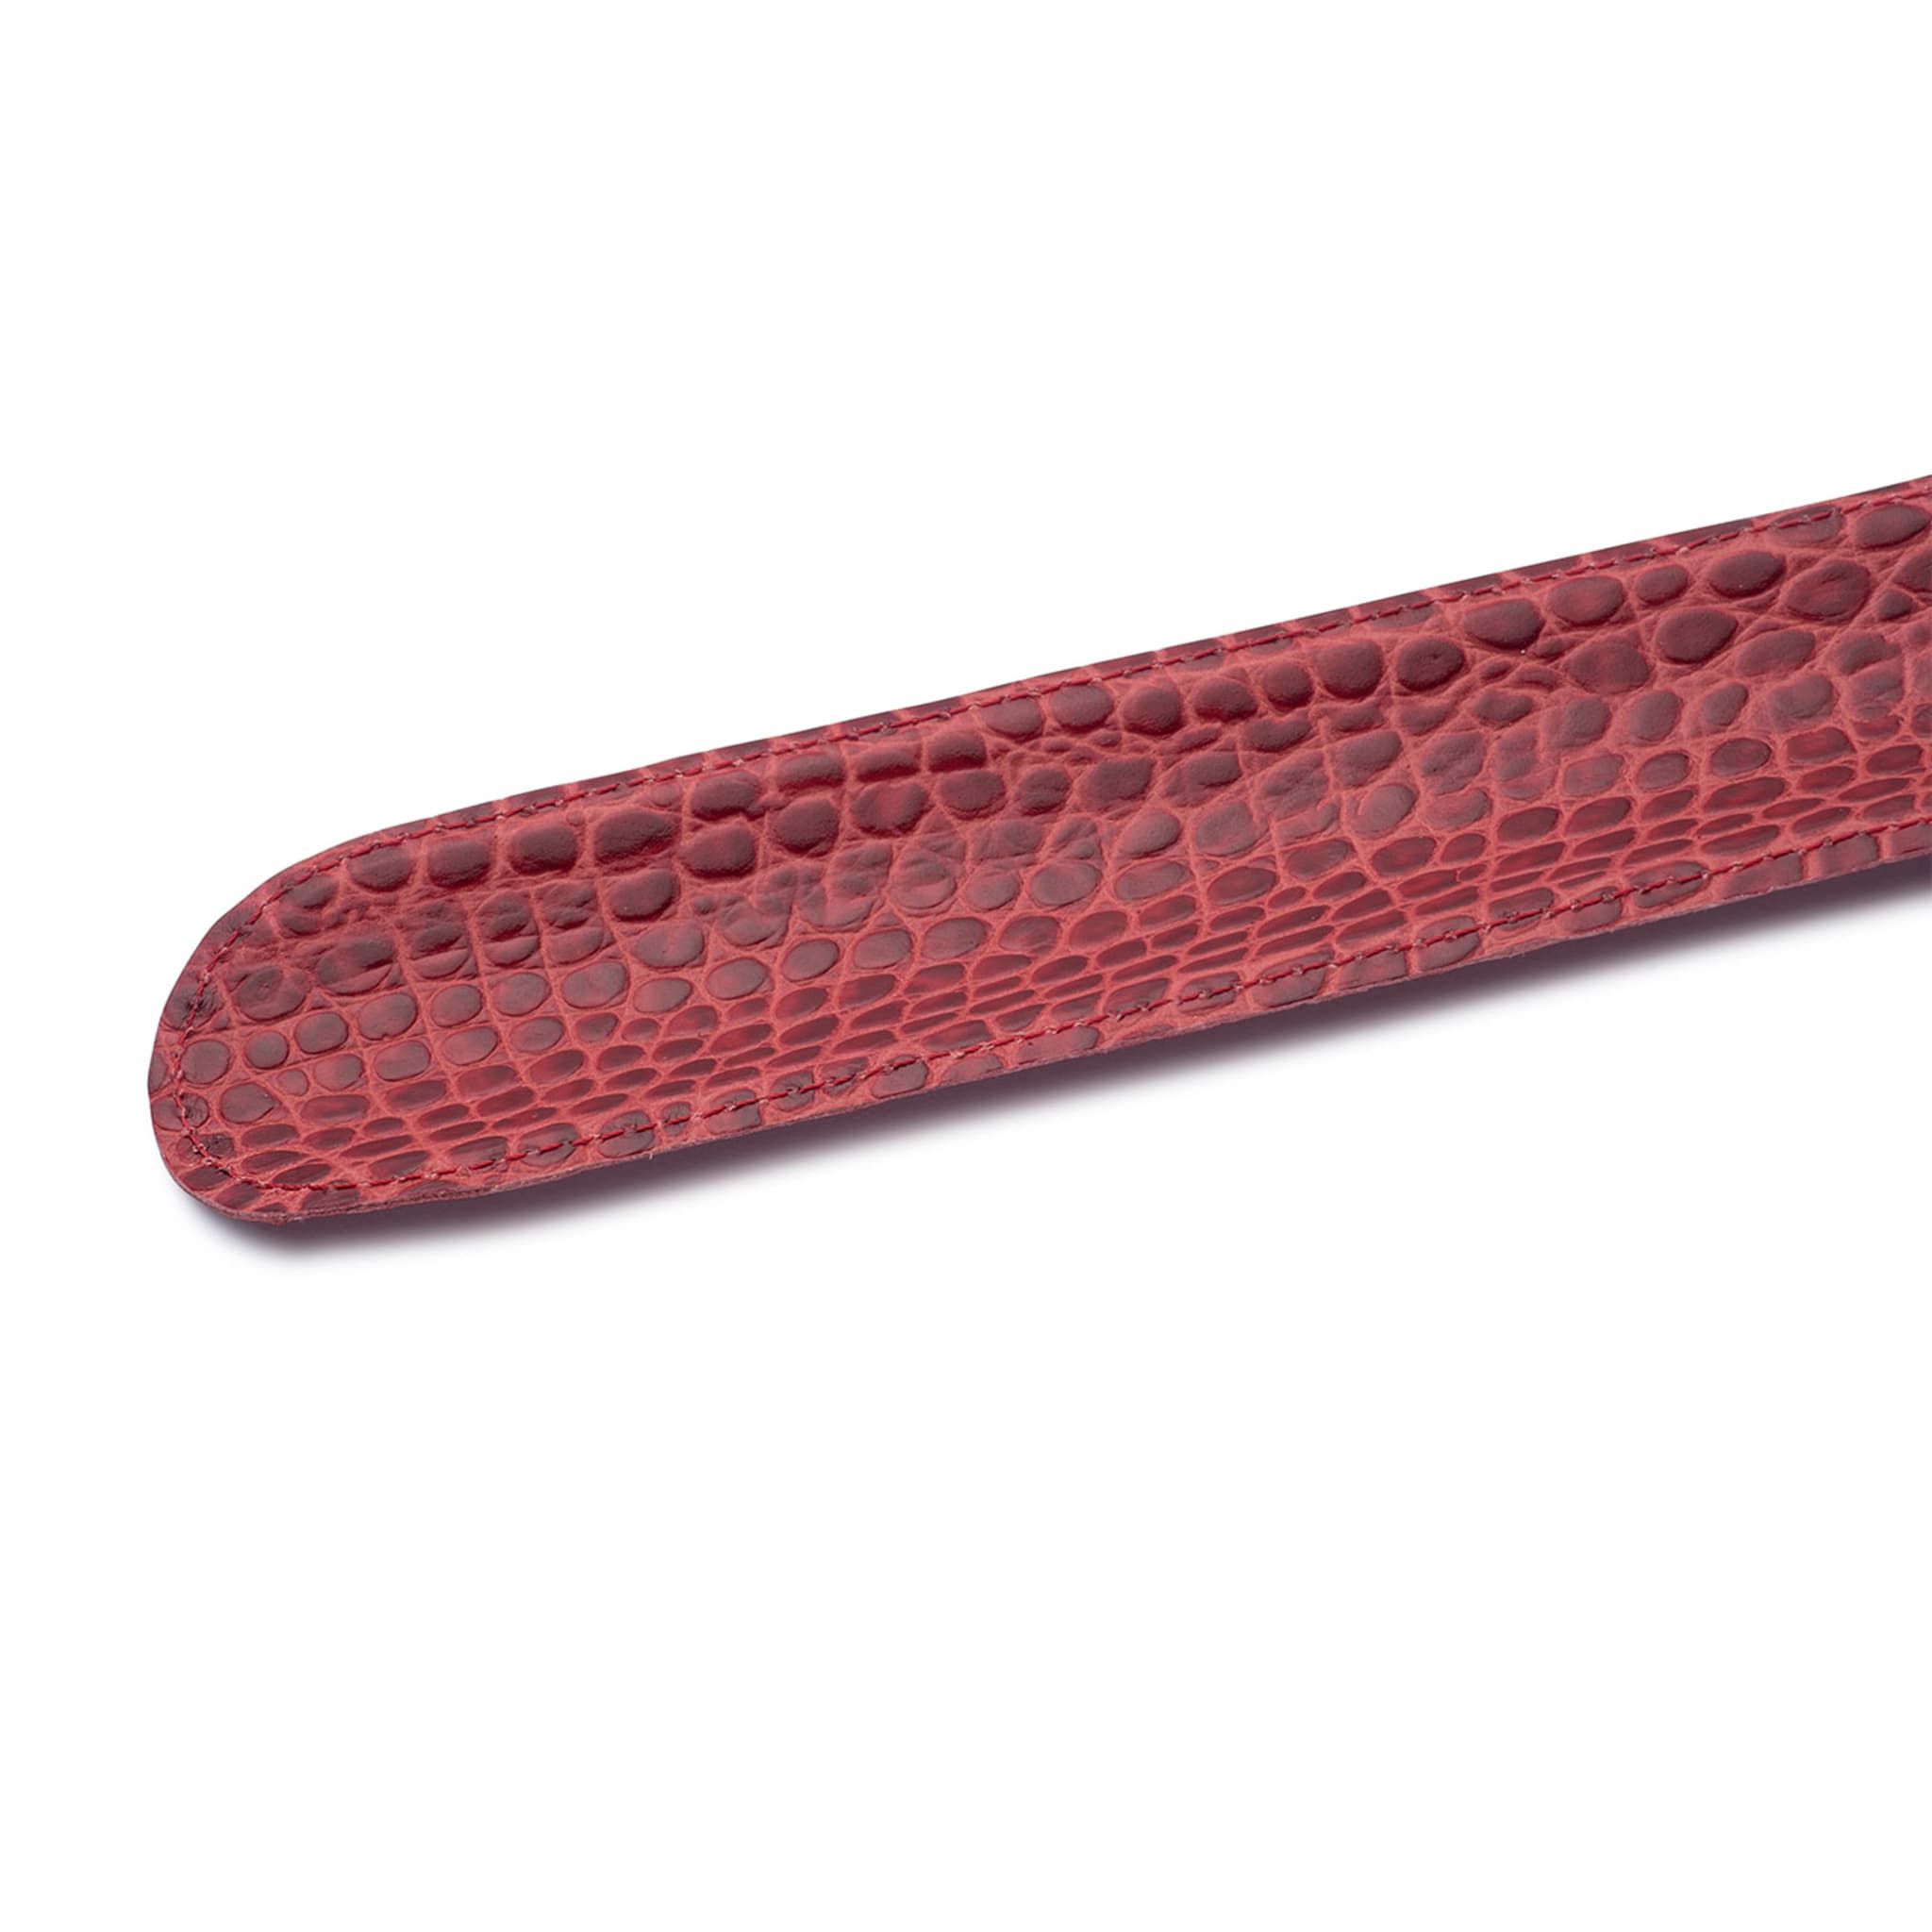 Red Mock-Croc Leather Shoe Horn - Alternative view 2